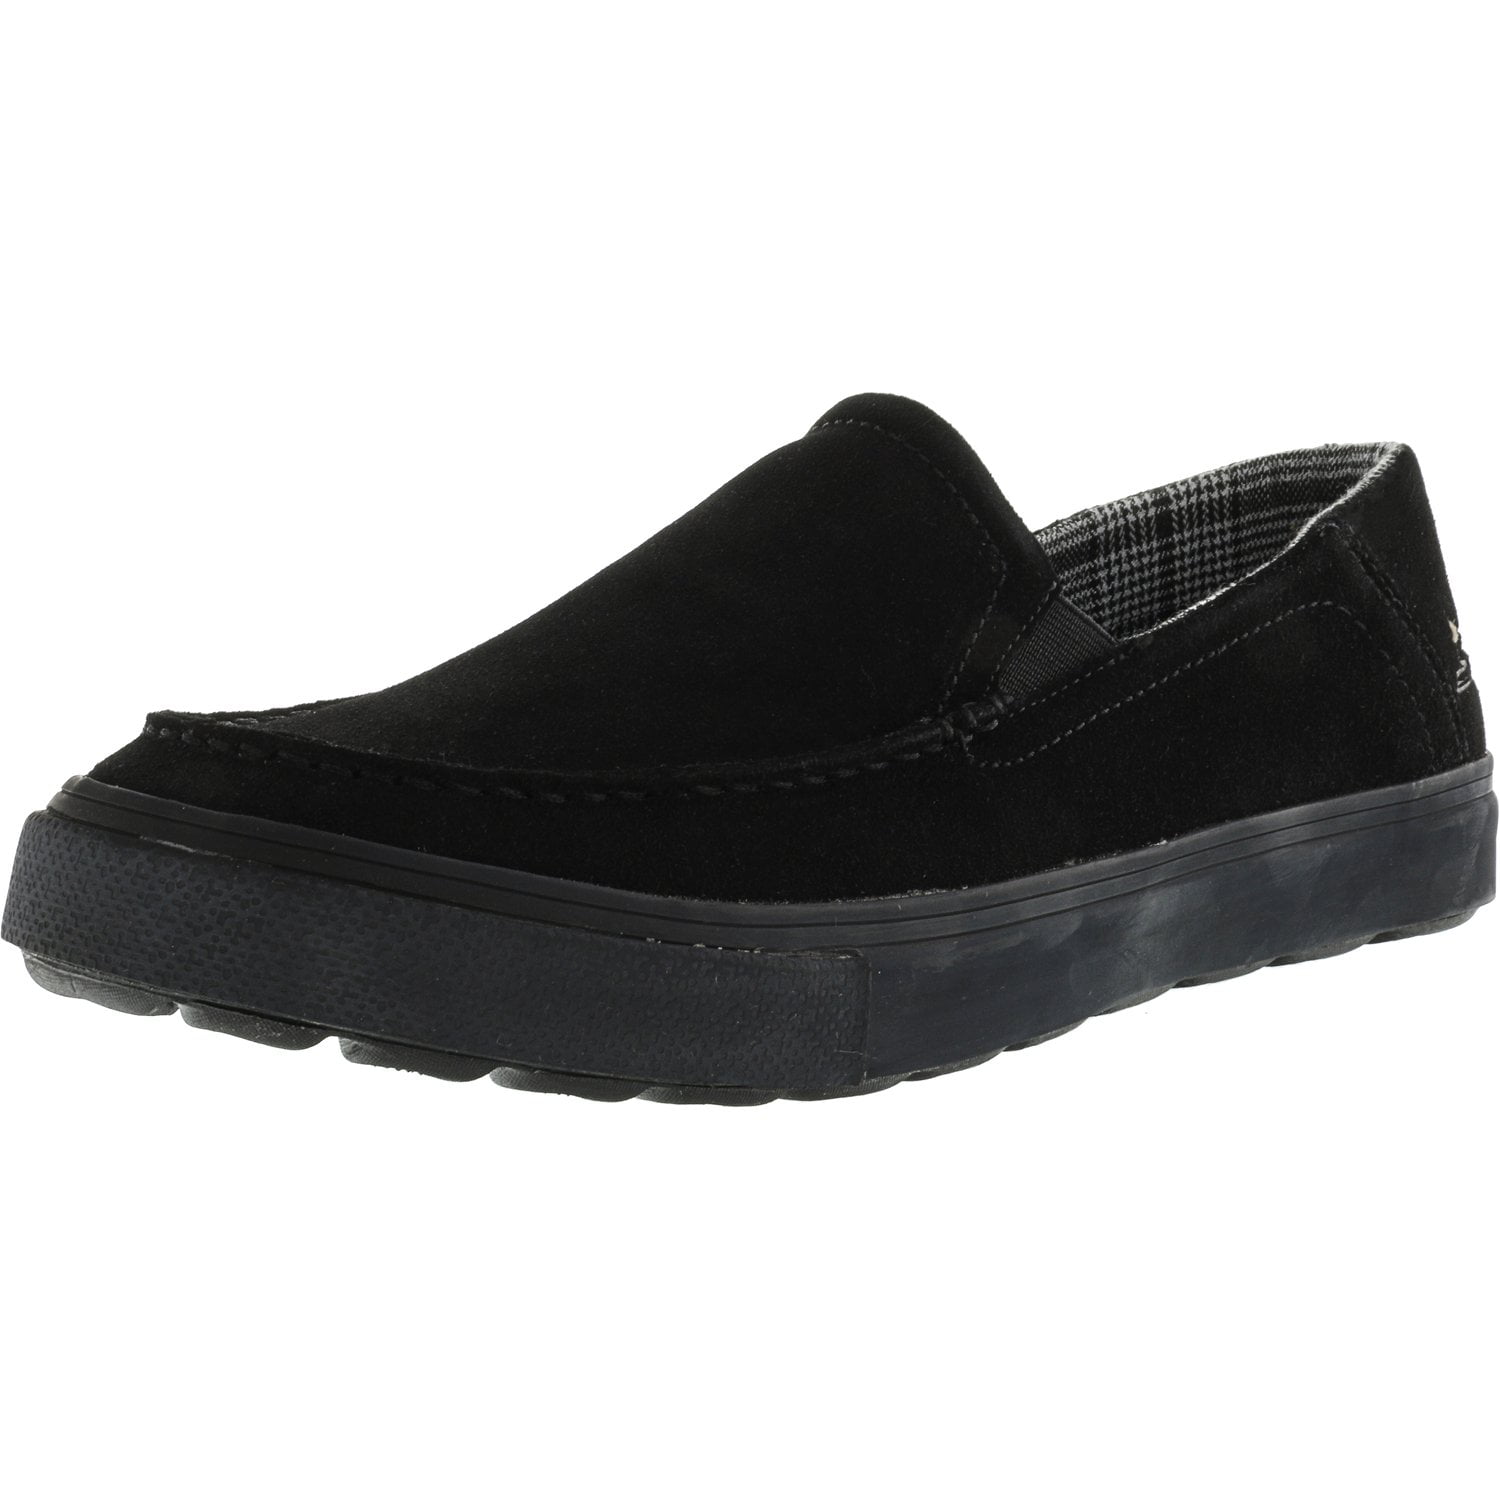 Skechers Men's Go Vulc Chill Black Ankle-High Suede Slip-On Shoes - 11M ...